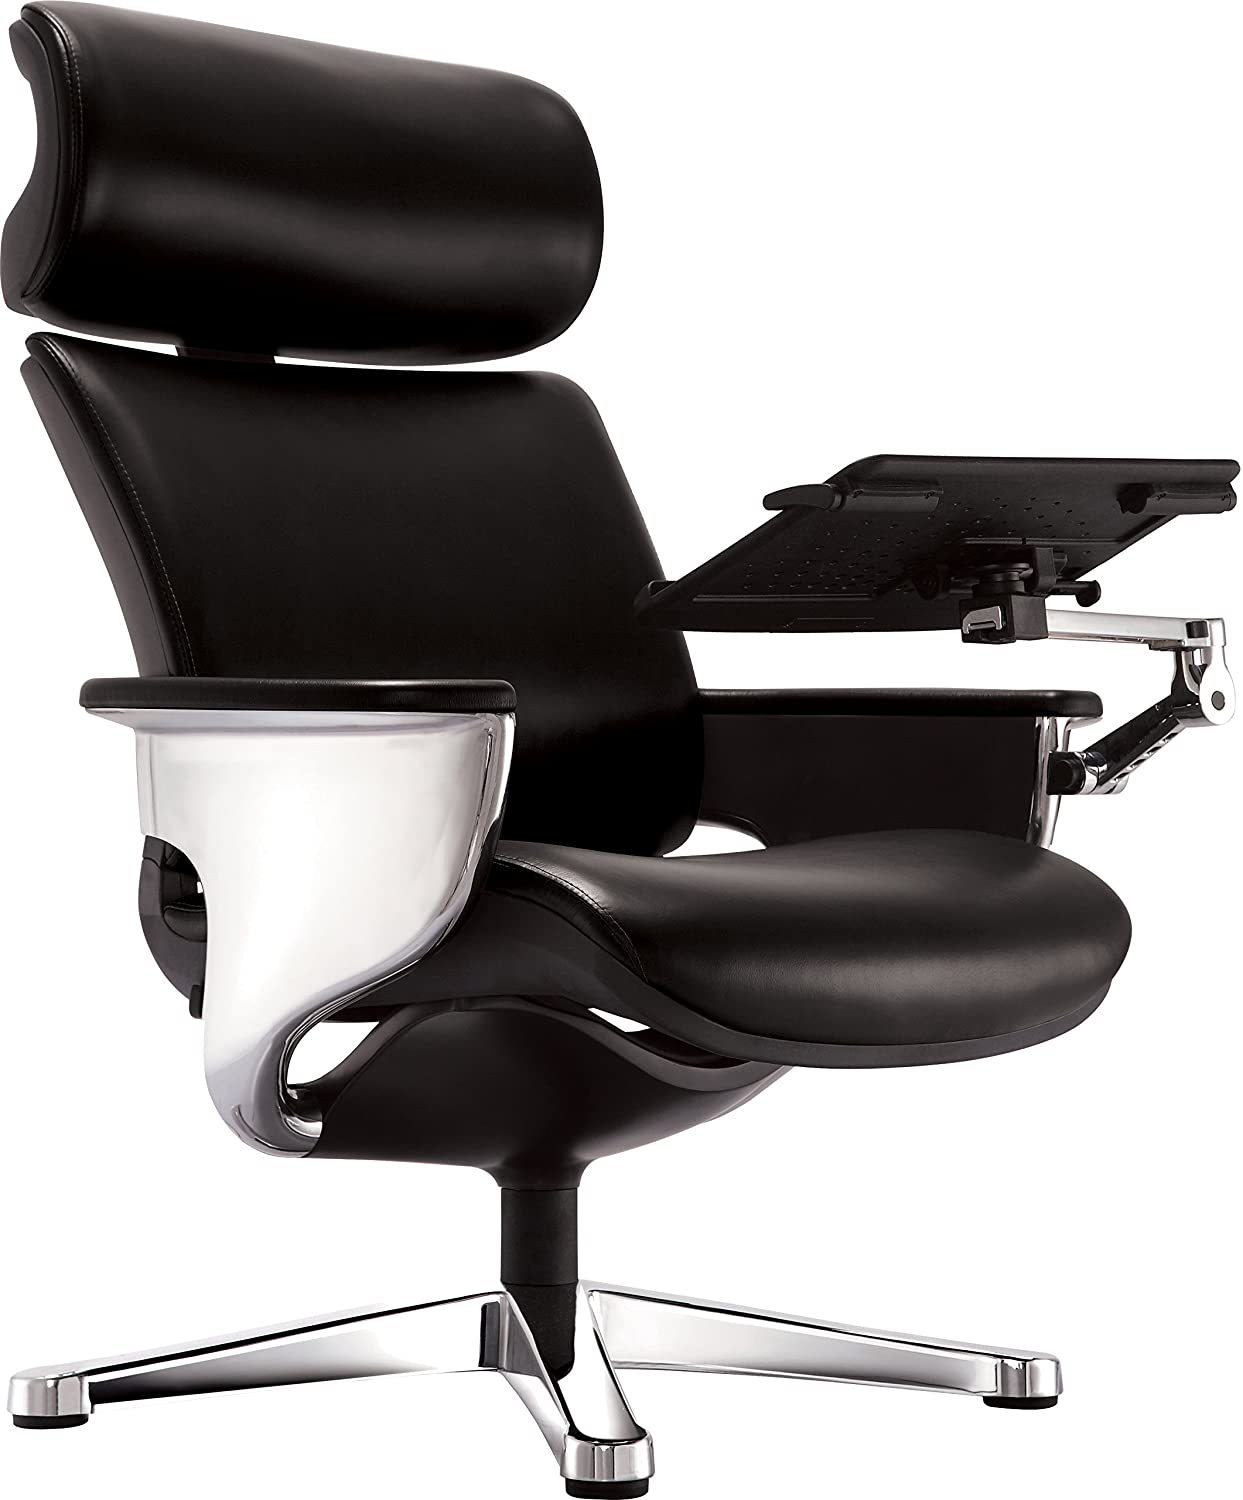 Black and Silver Swivel Faux Leather Executive Office Chair-372428-1